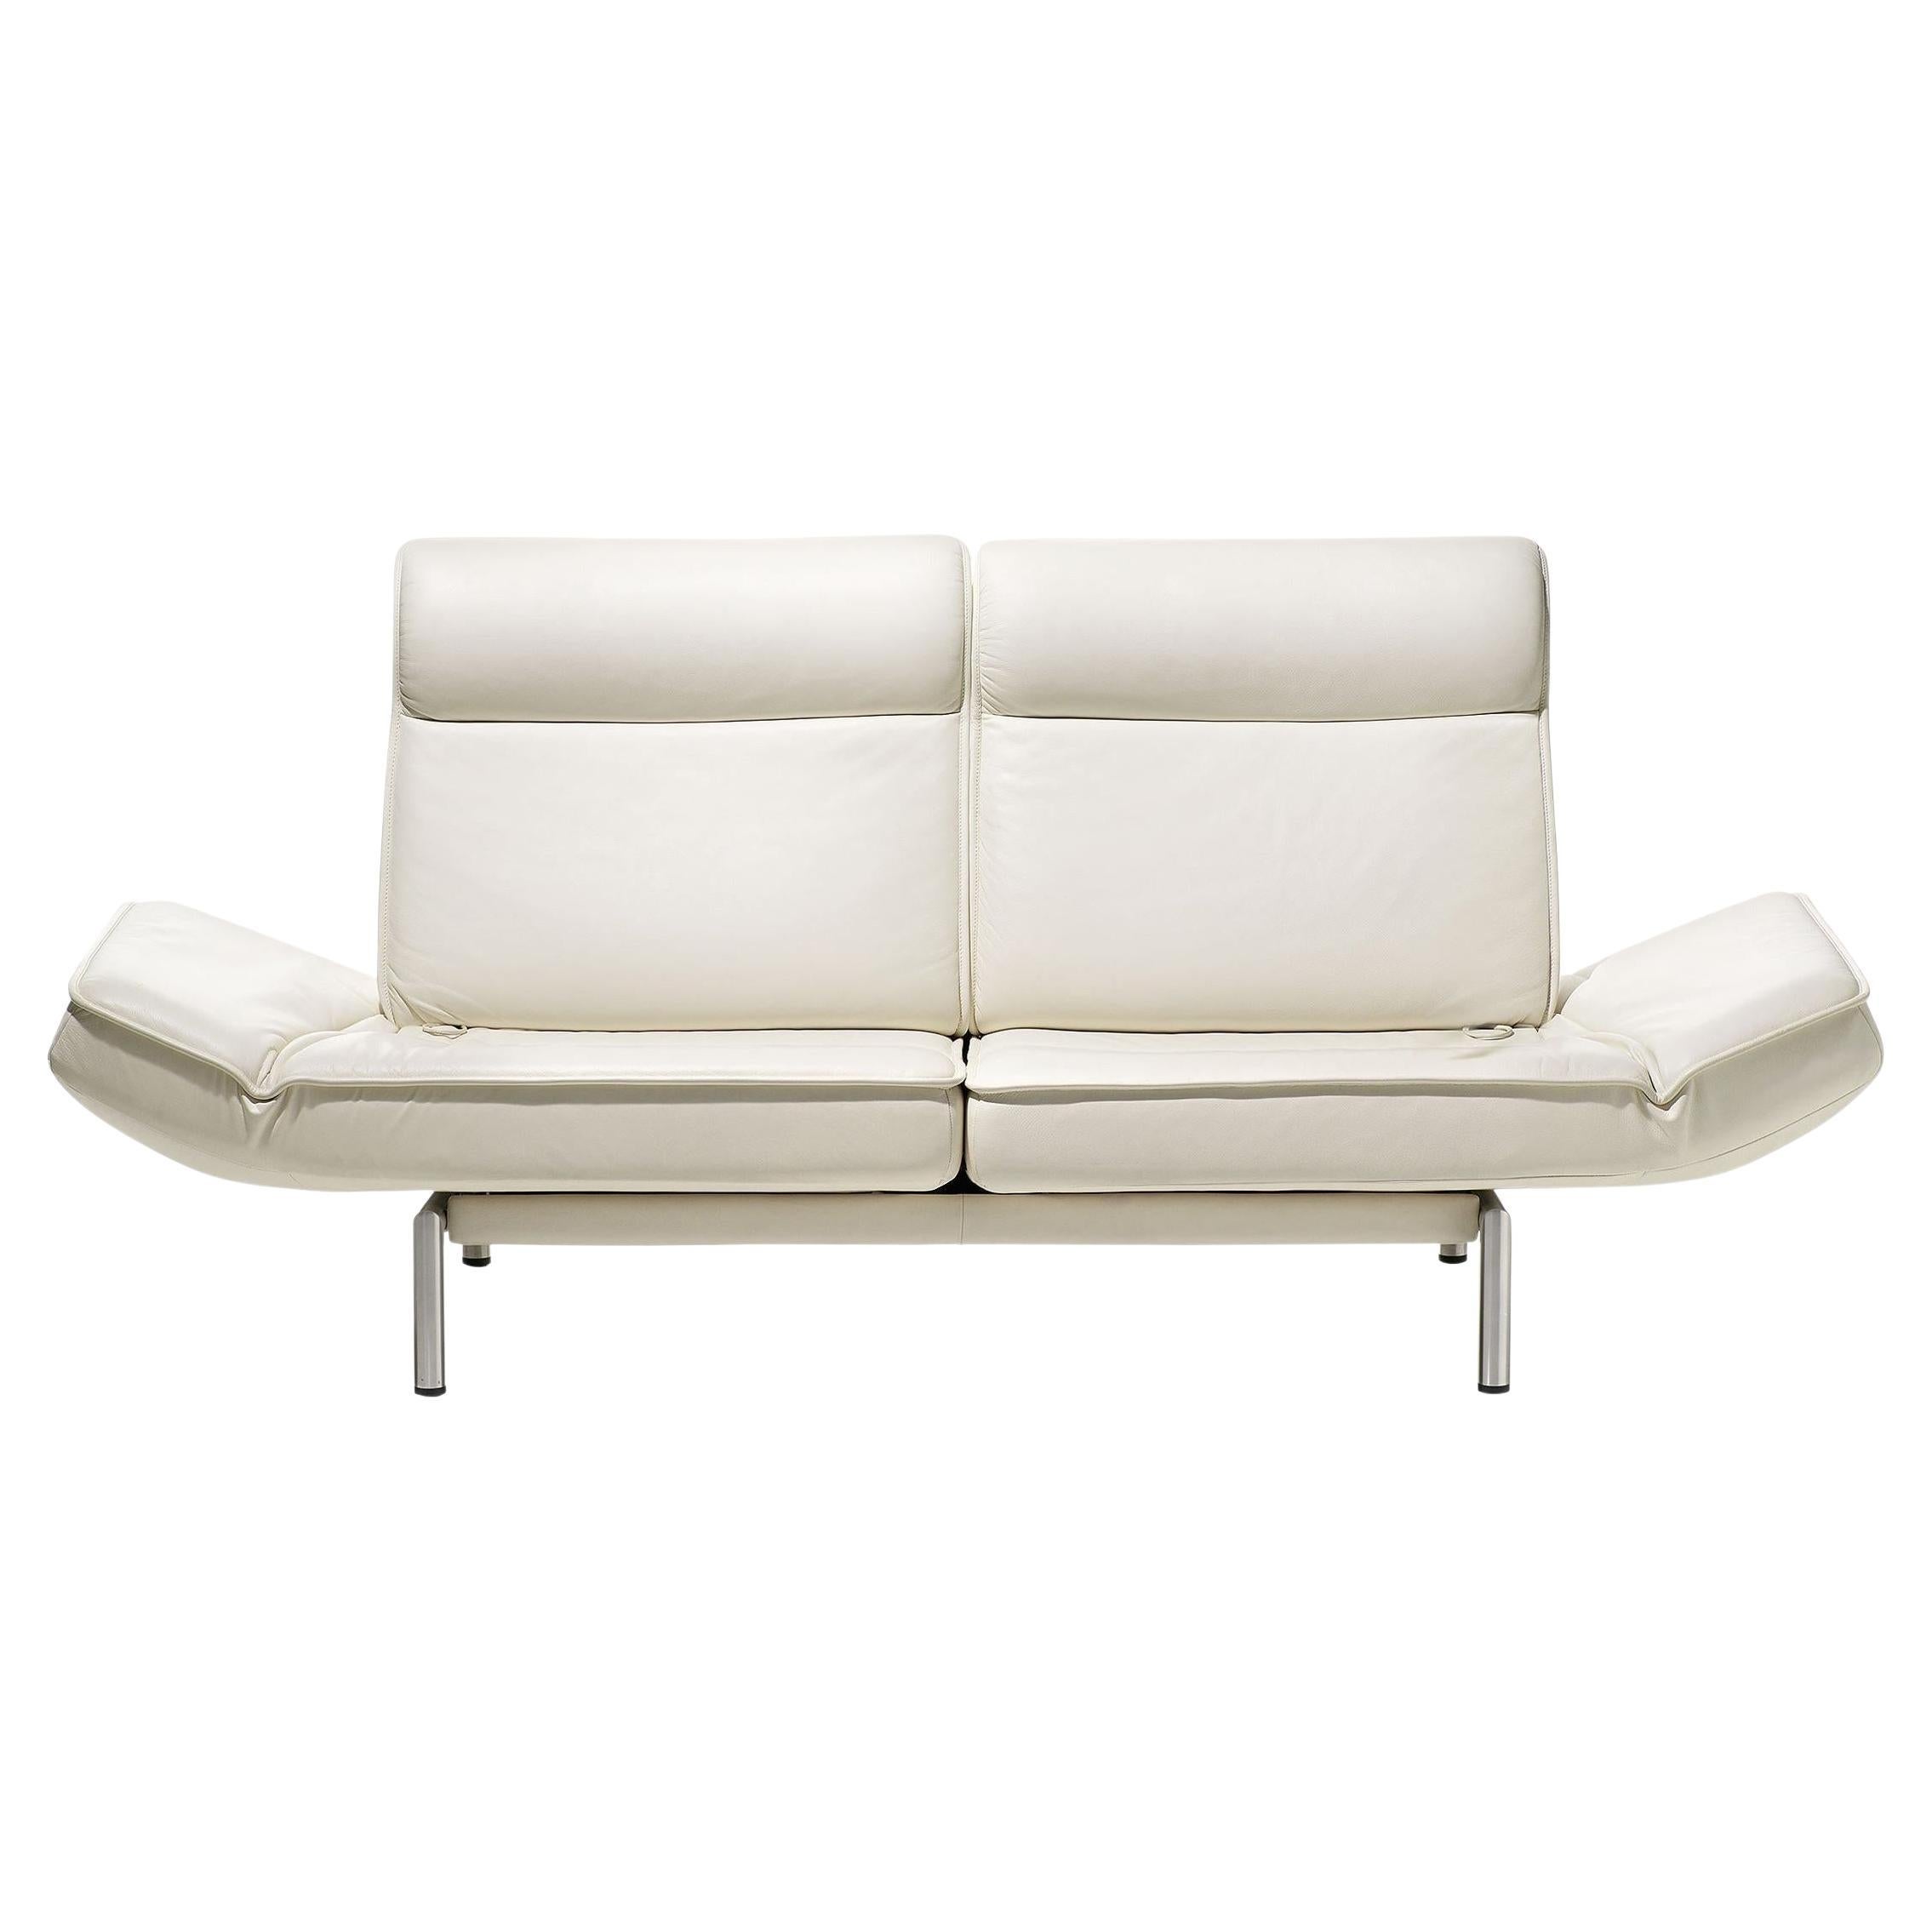 De Sede DS-450/02 Sofa in Off-White Upholstery by Thomas Althaus